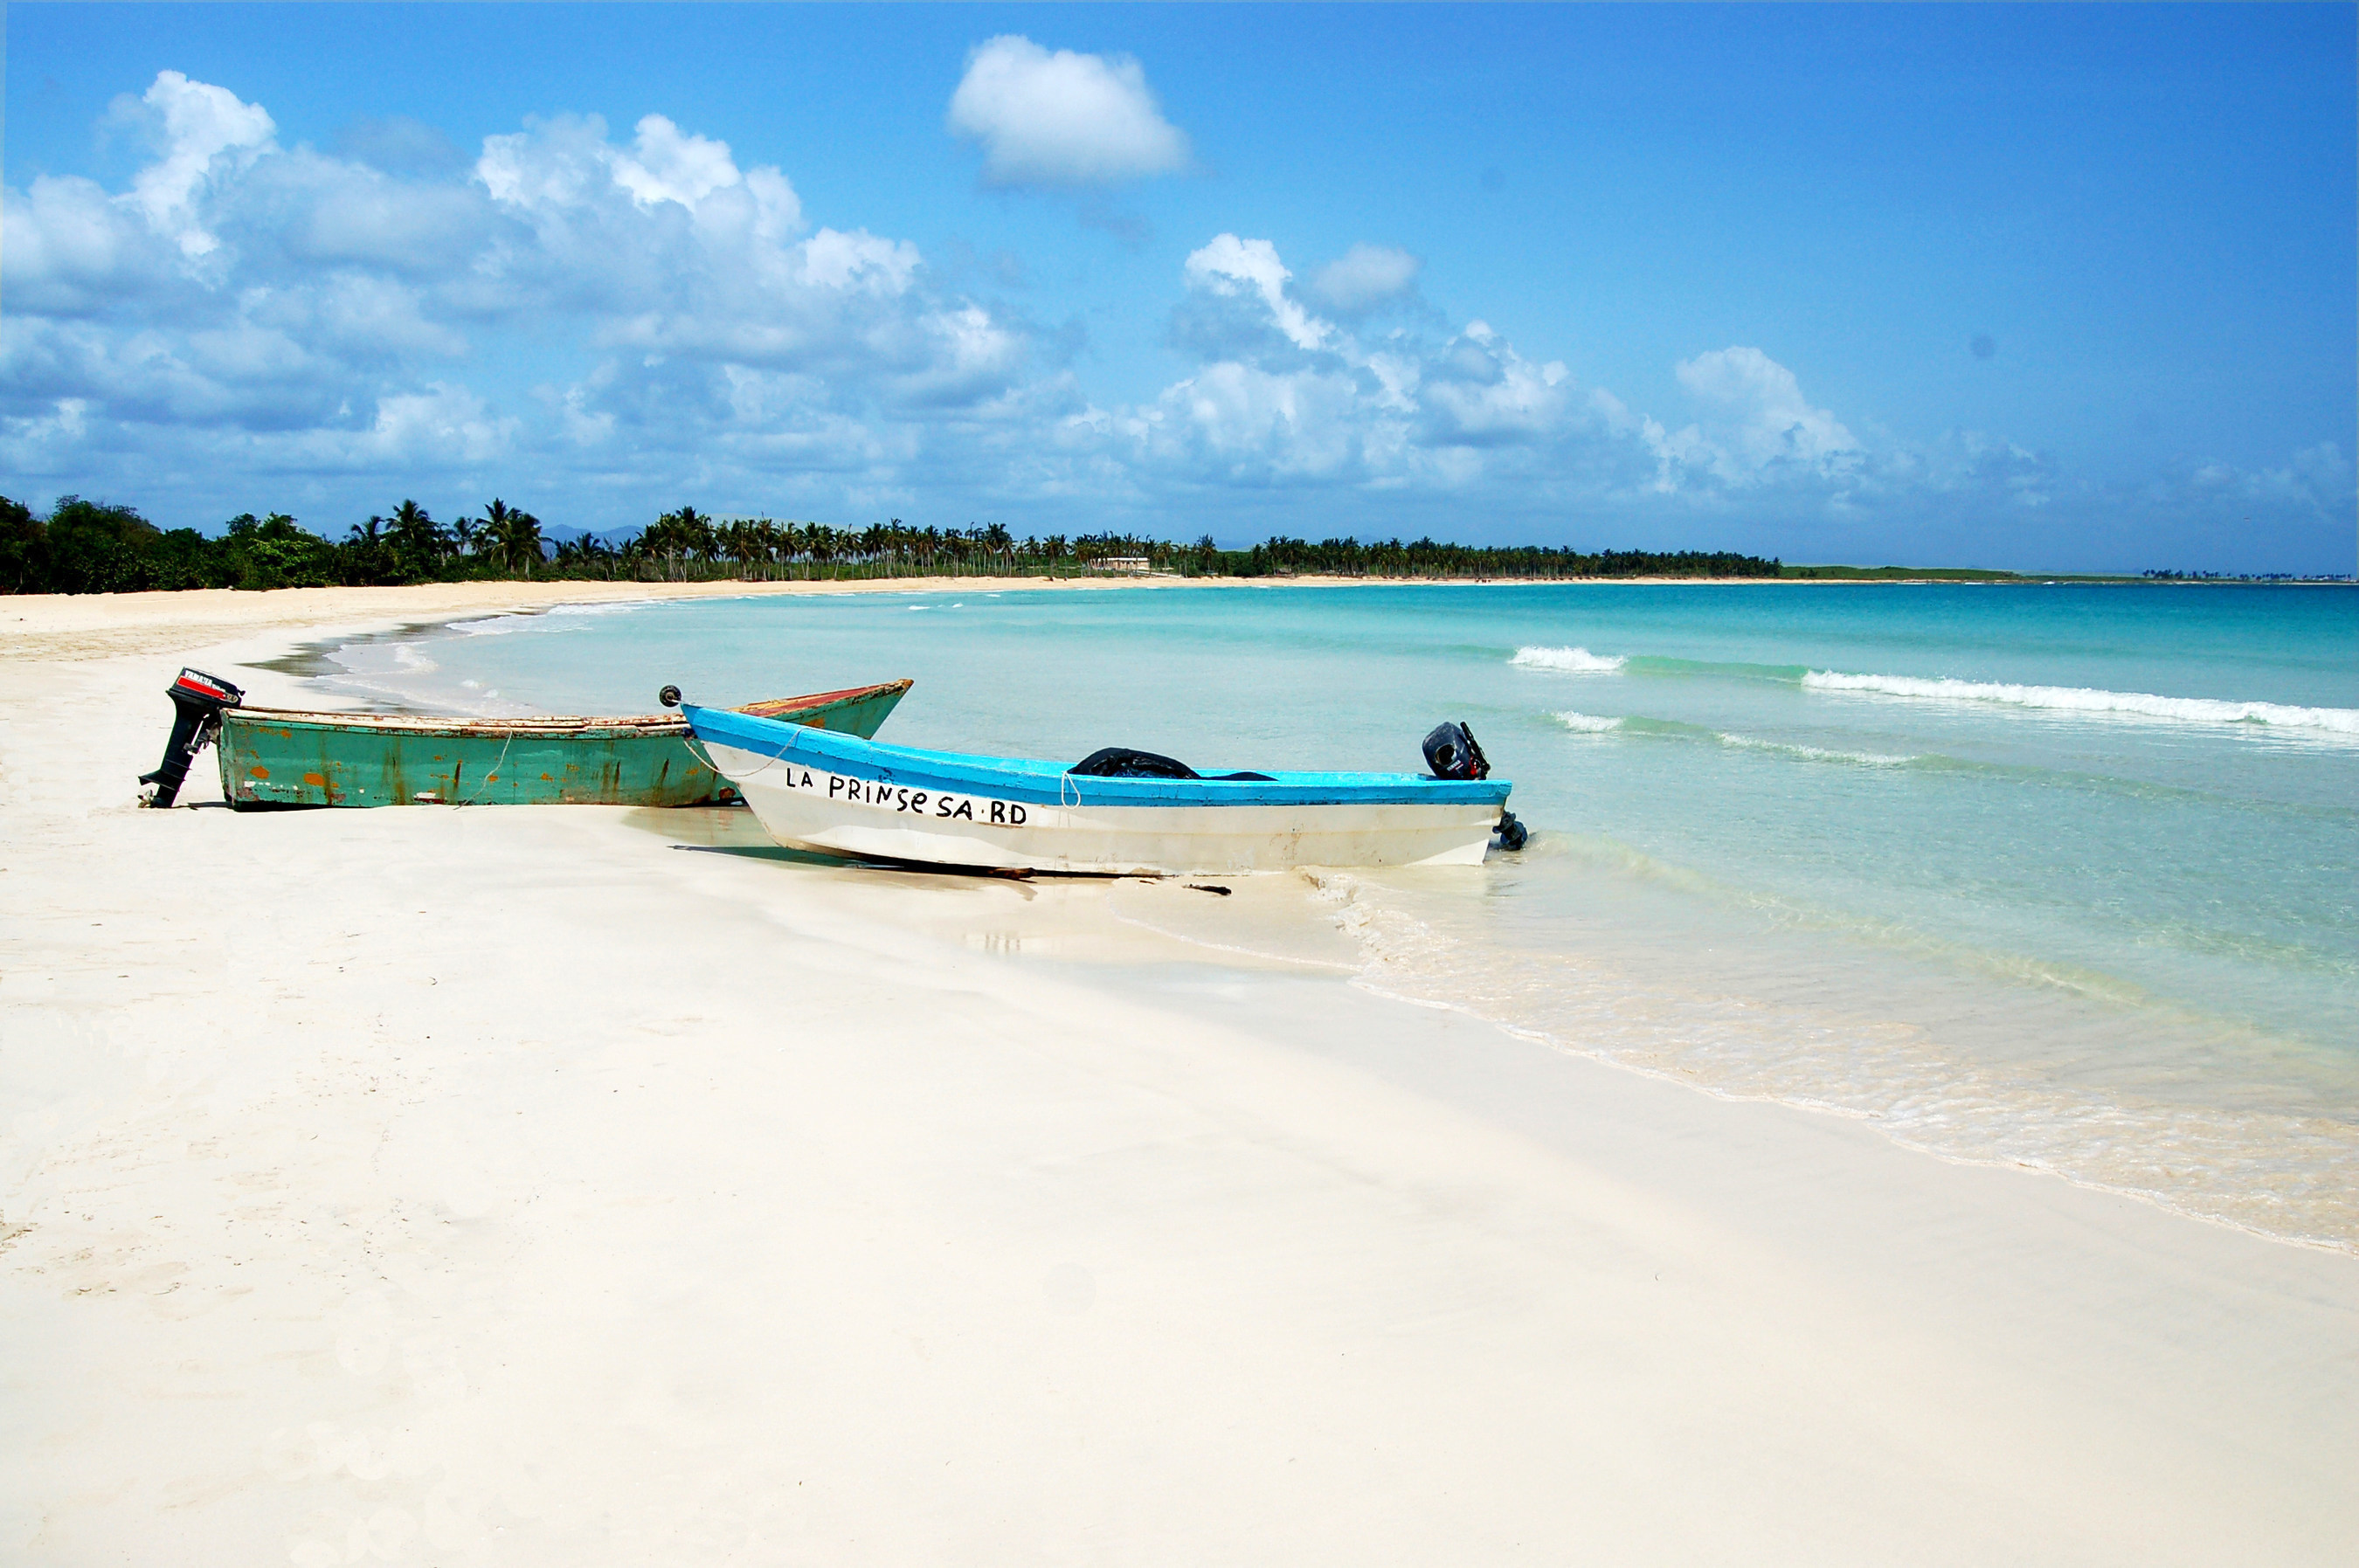 Punta Cana in Dominican Republic boasts a stunning 100-mile stretch of soft white sand beaches, refreshing island breezes, luxurious resorts, vibrant culture and much more - find out why Punta Cana is 2016's #1 Destination in the Caribbean!